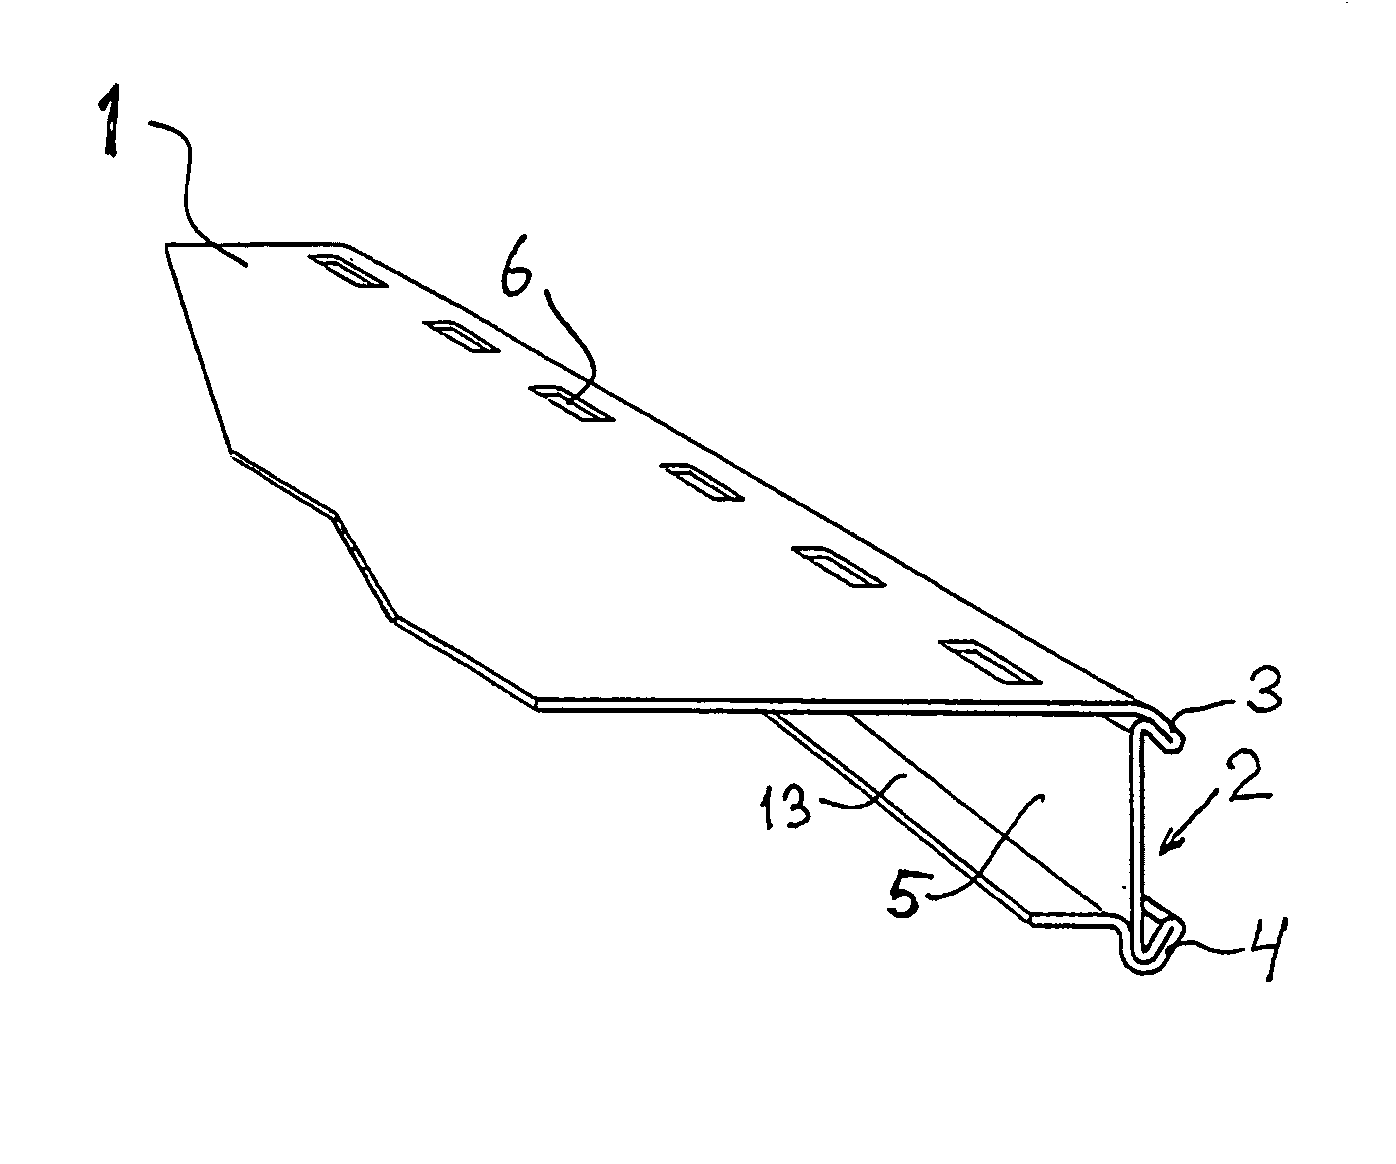 Profile moulding intended to be mounted at the front edge of a shelf and method for manufacturing